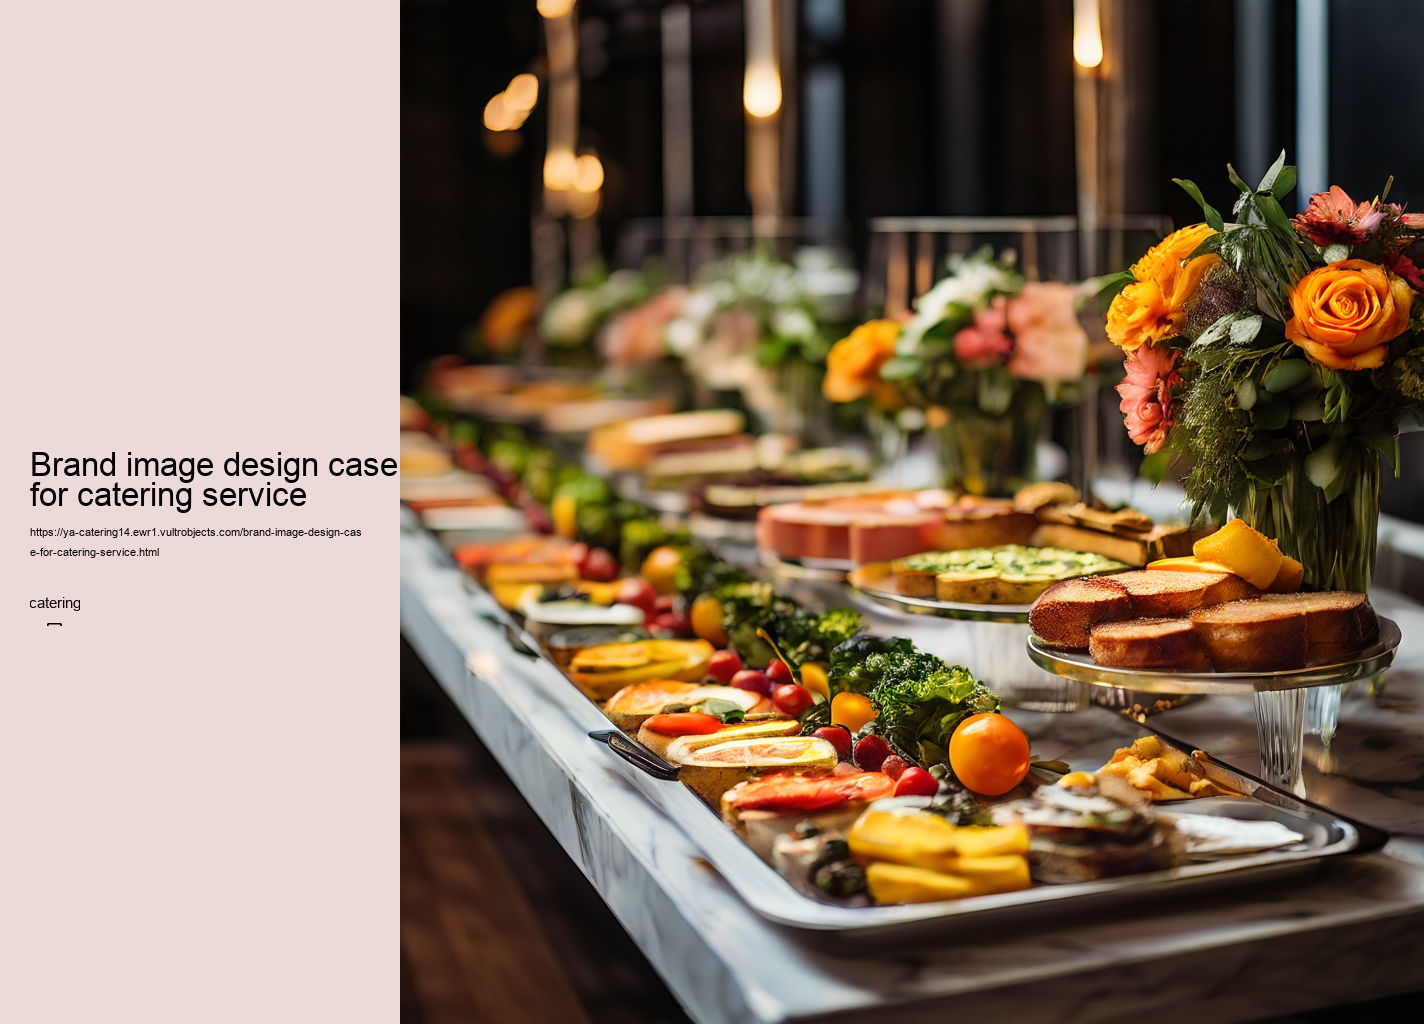 Brand image design case for catering service